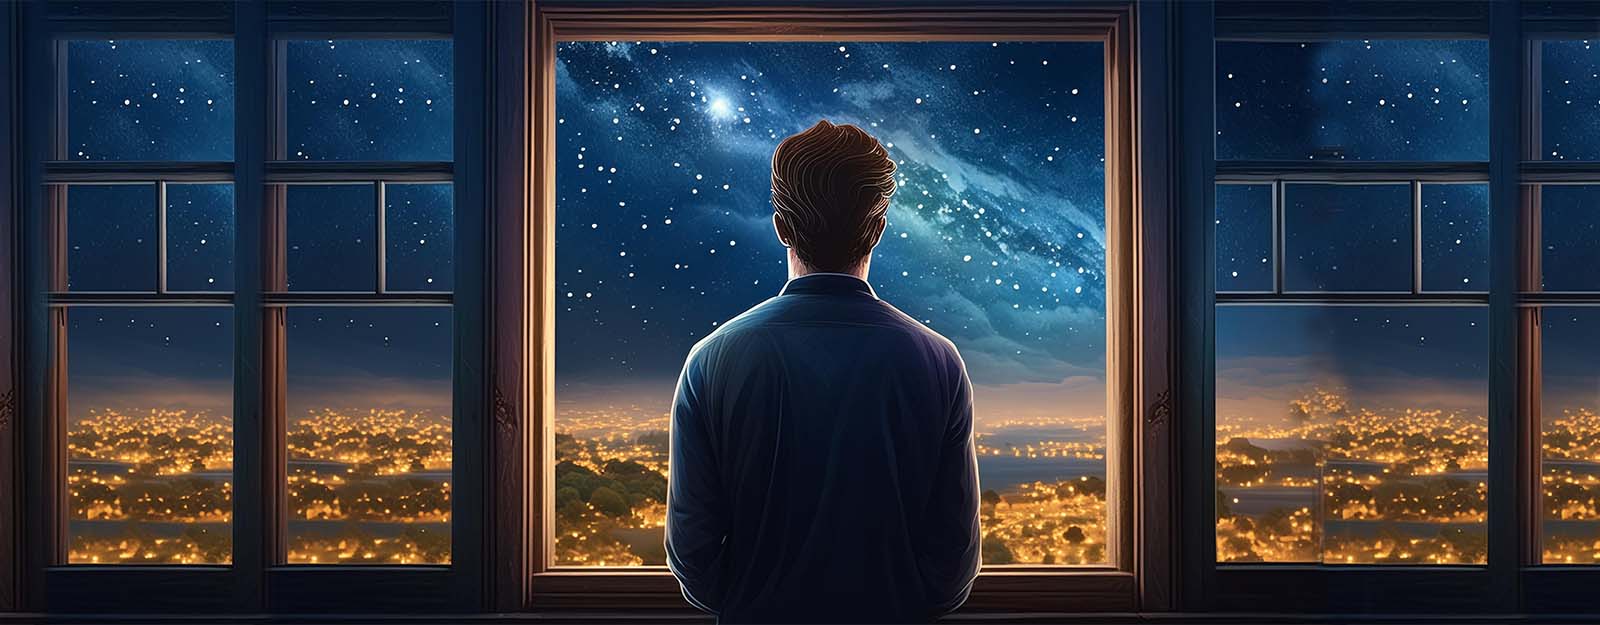 Artwork of the back of a person looking out of a large window overlooking a night sky.